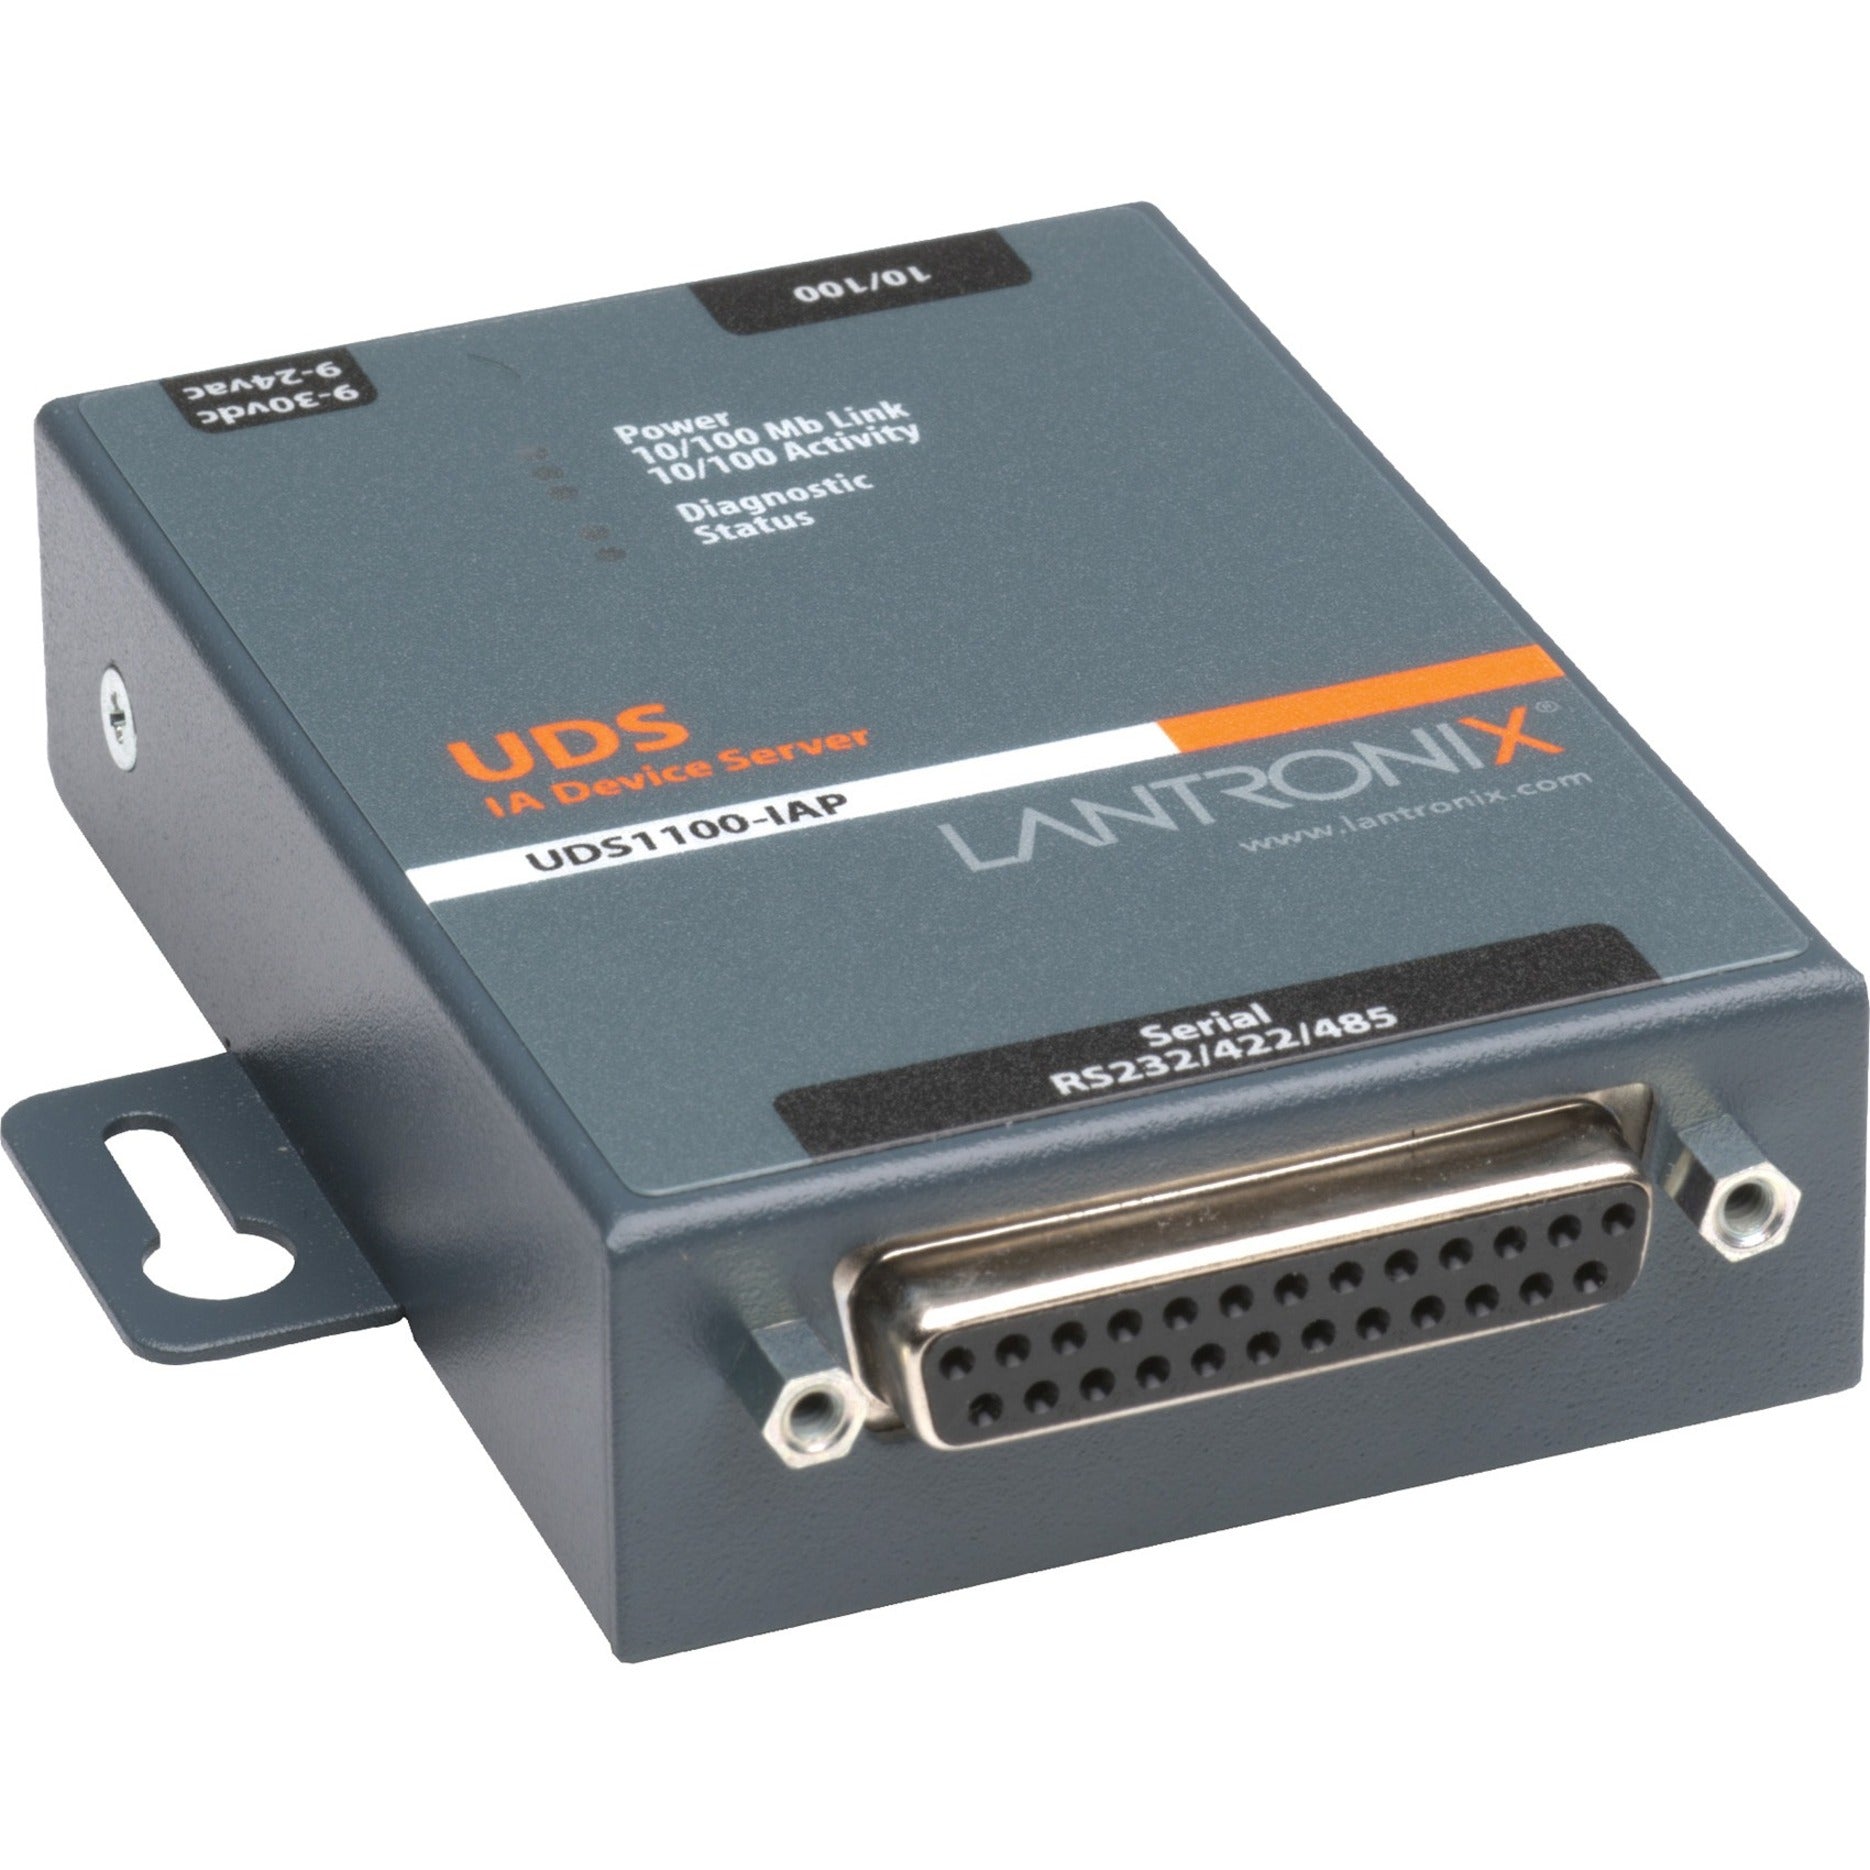 Lantronix UD1100IA2-01 UDS1100-IAP Industrial Device Server, Fast Ethernet, Wall Mountable